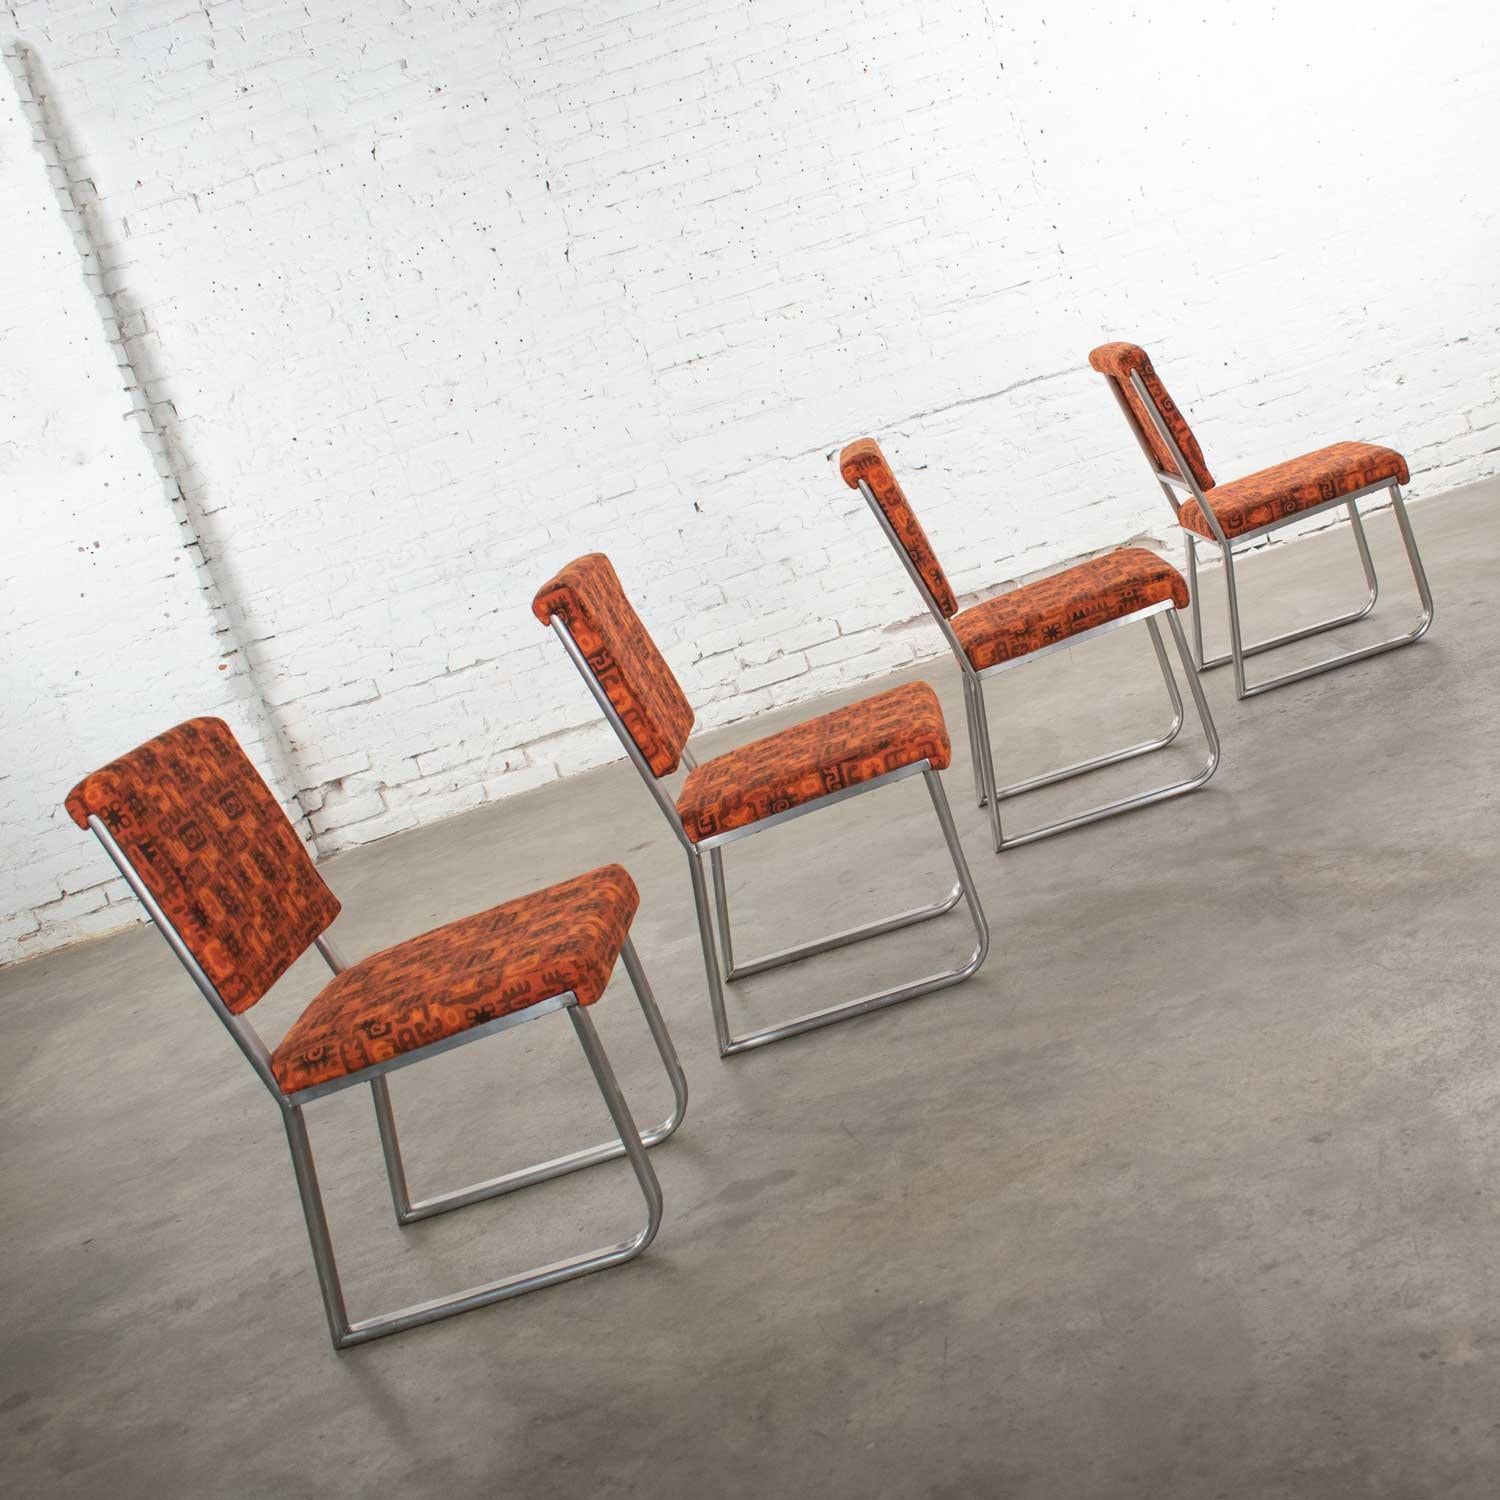 4 Streamline Modern Railroad Dining Car Chairs Stainless Steel and Orange Fabric For Sale 4